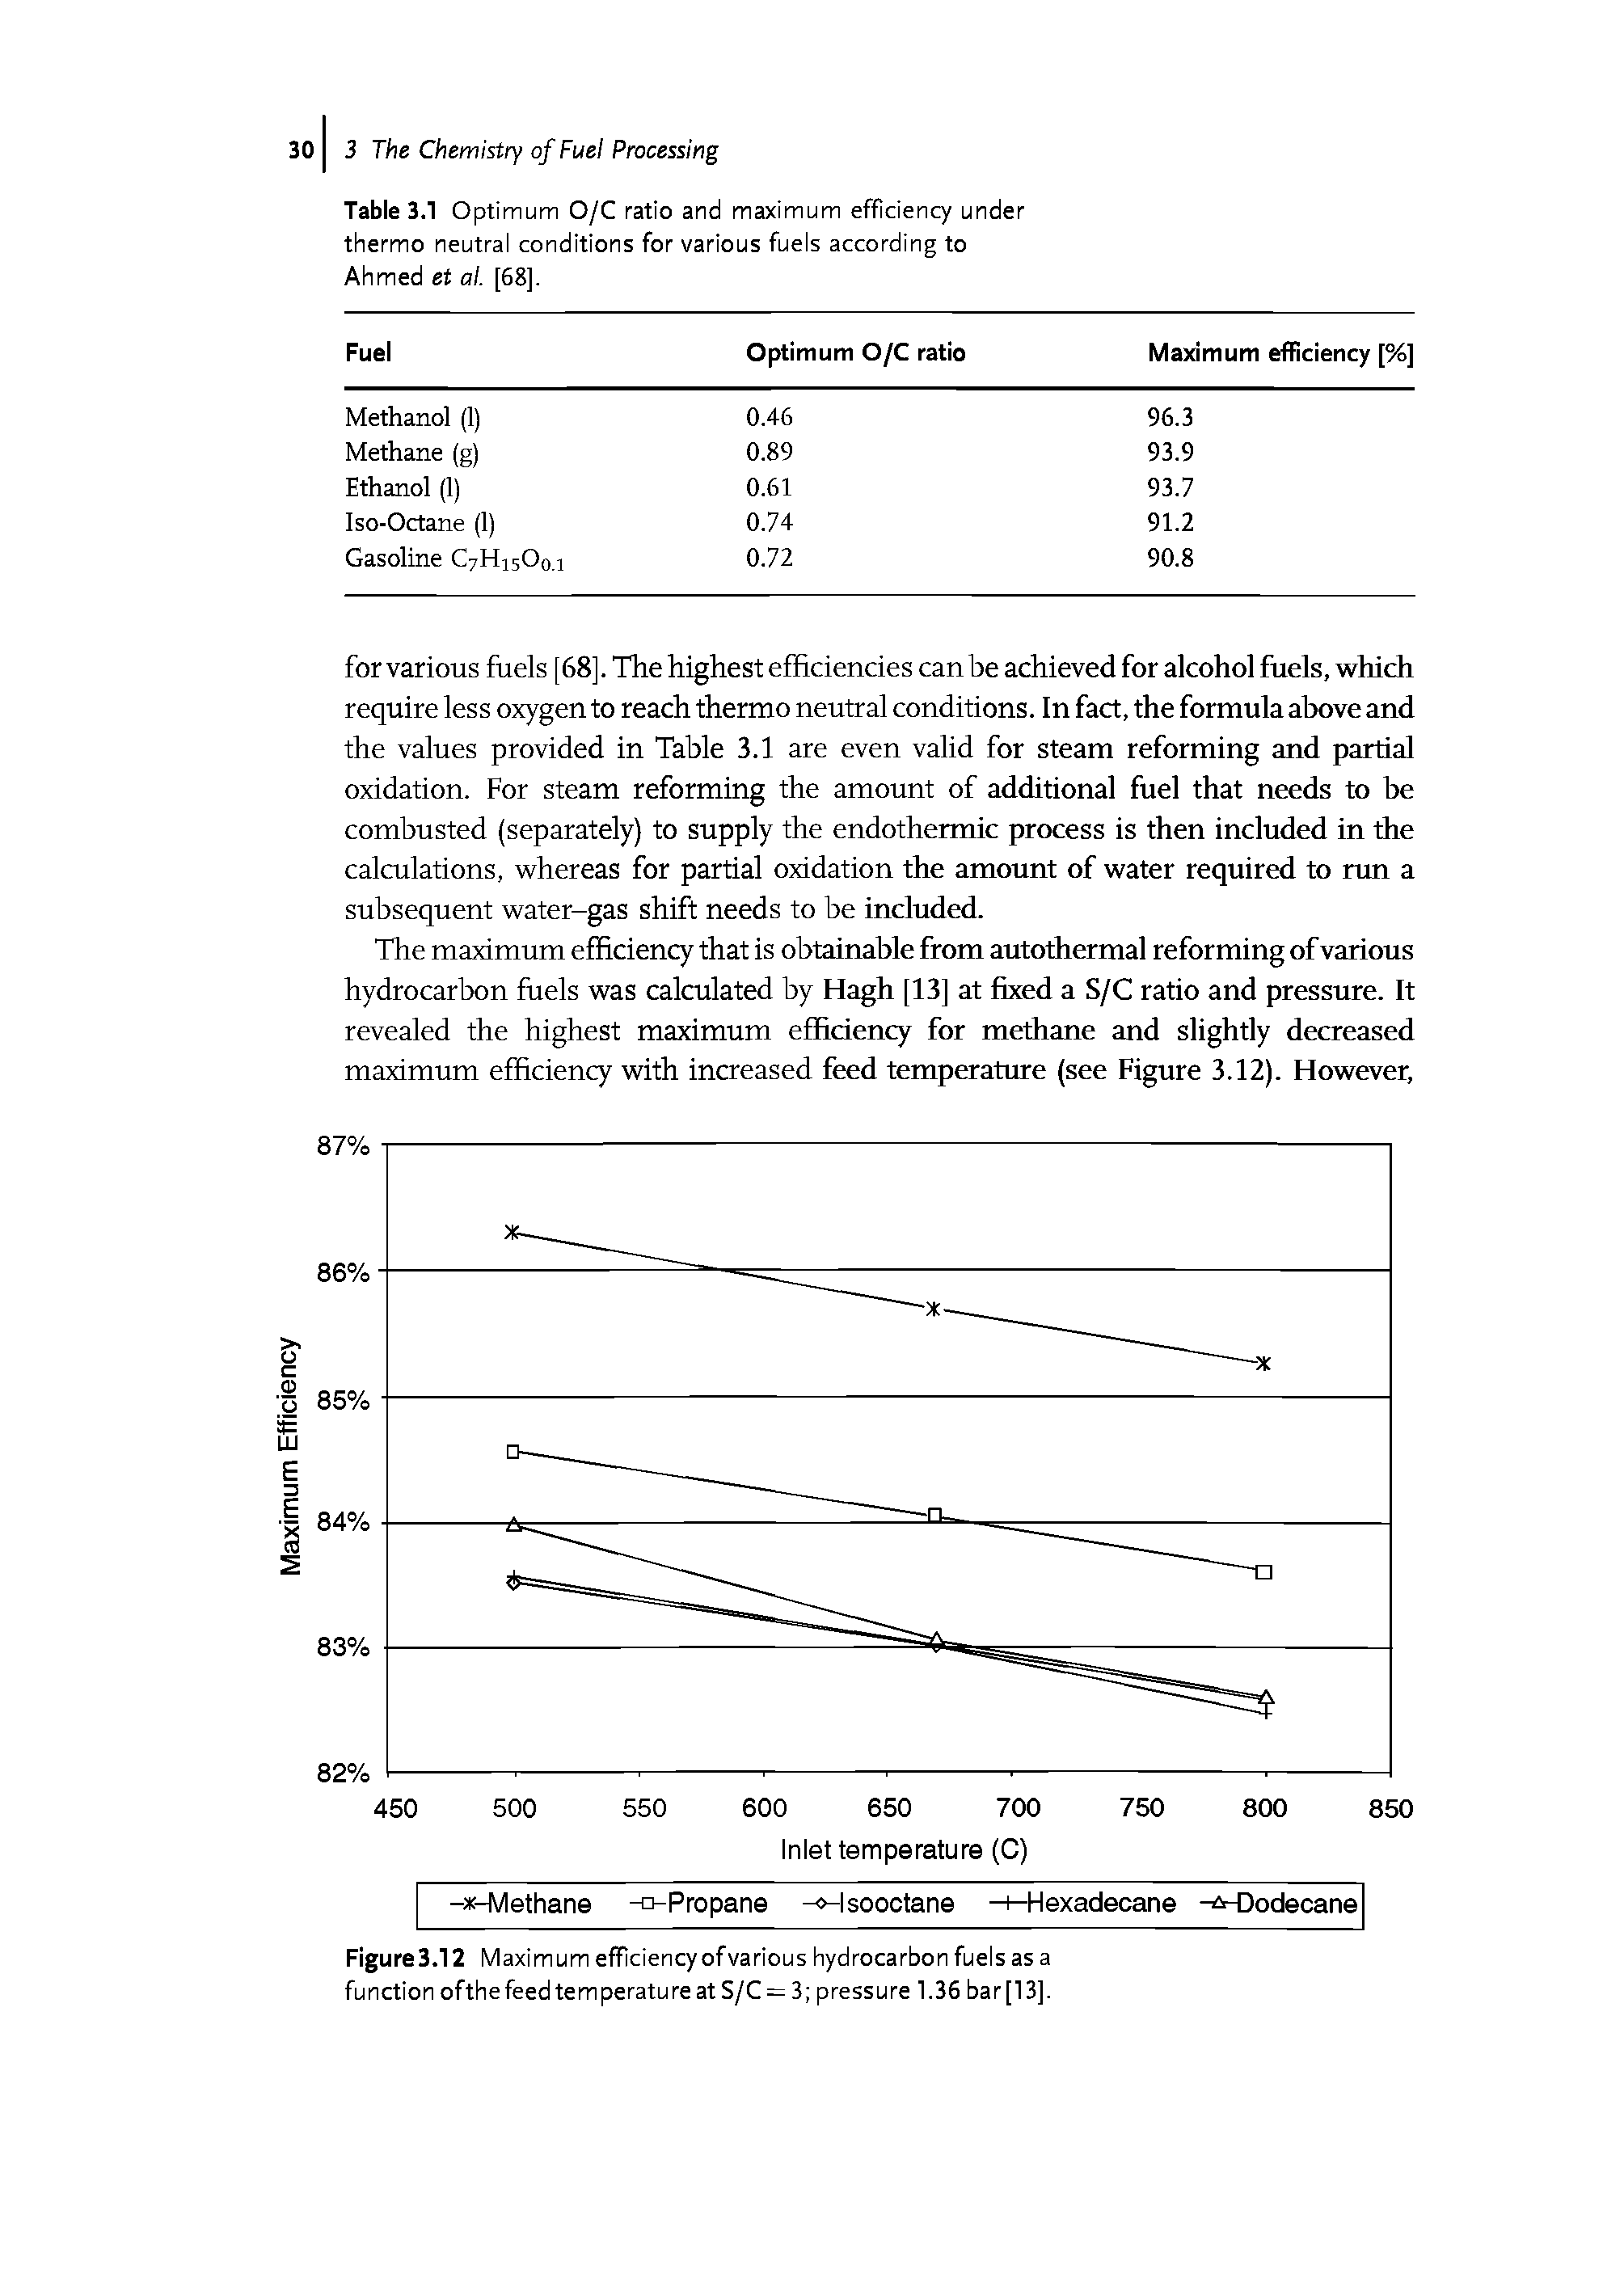 Table 3.1 Optimum O/C ratio and maximum efficiency under thermo neutral conditions for various fuels according to Ahmed et al. [68].